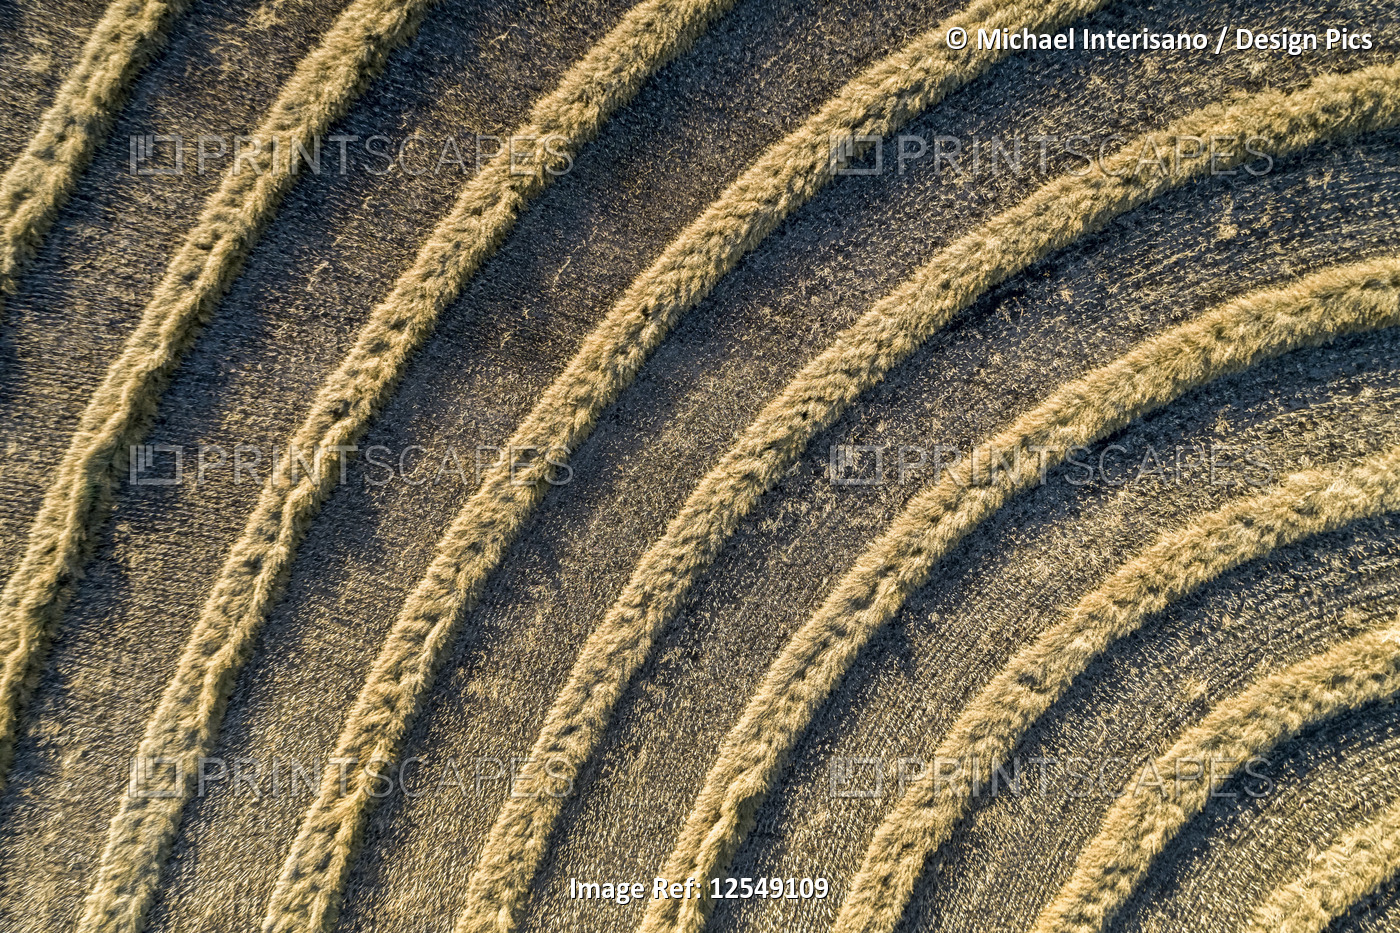 A graphic aerial view of cut canola lines in a circular pattern in a field, ...